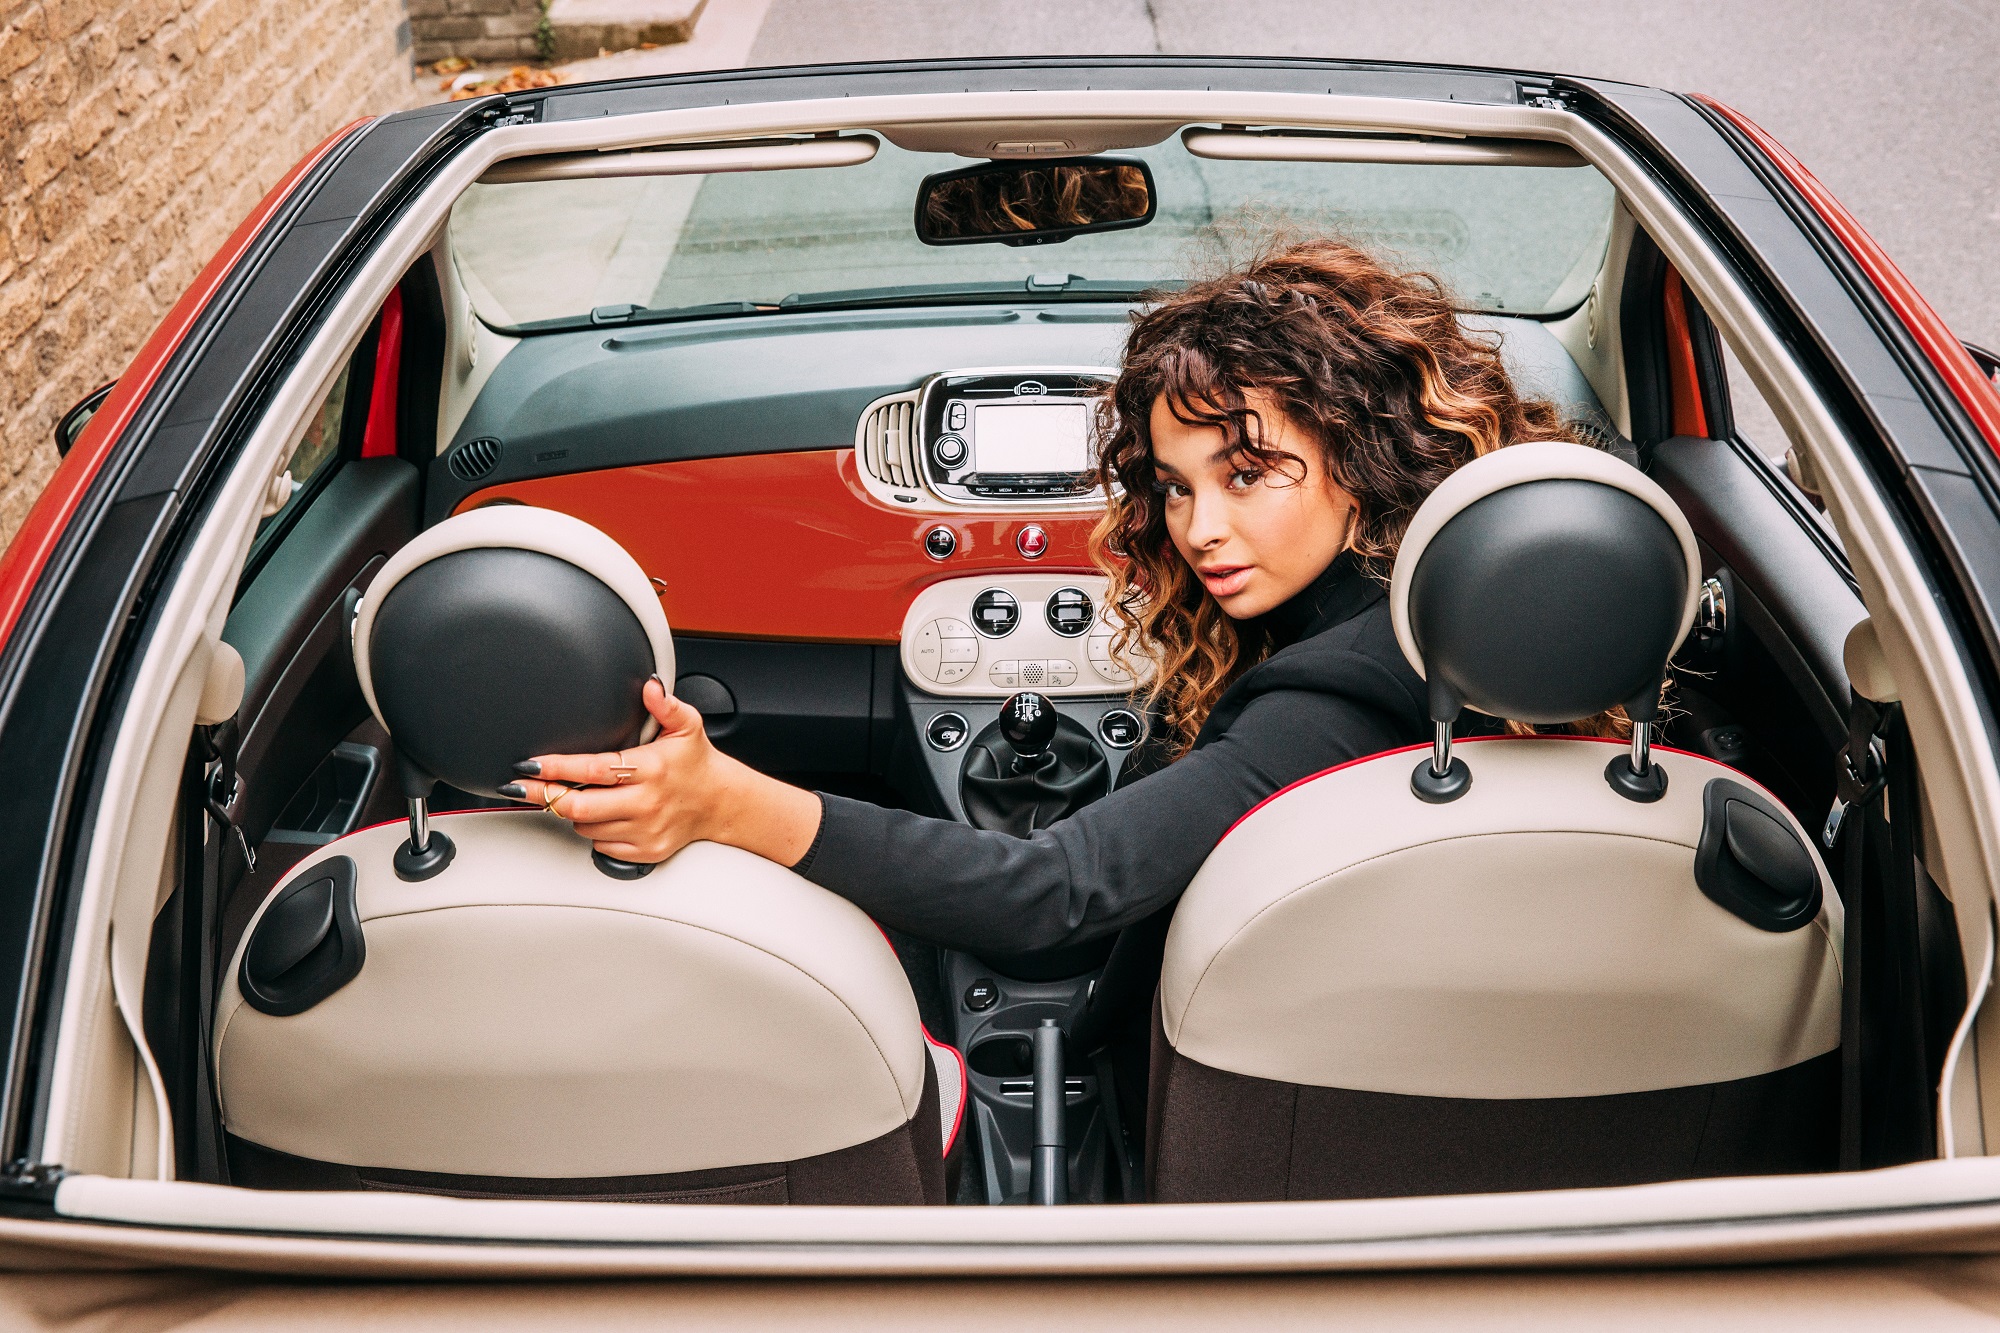 Fiat 500 to perform with Ella Eyre on stage